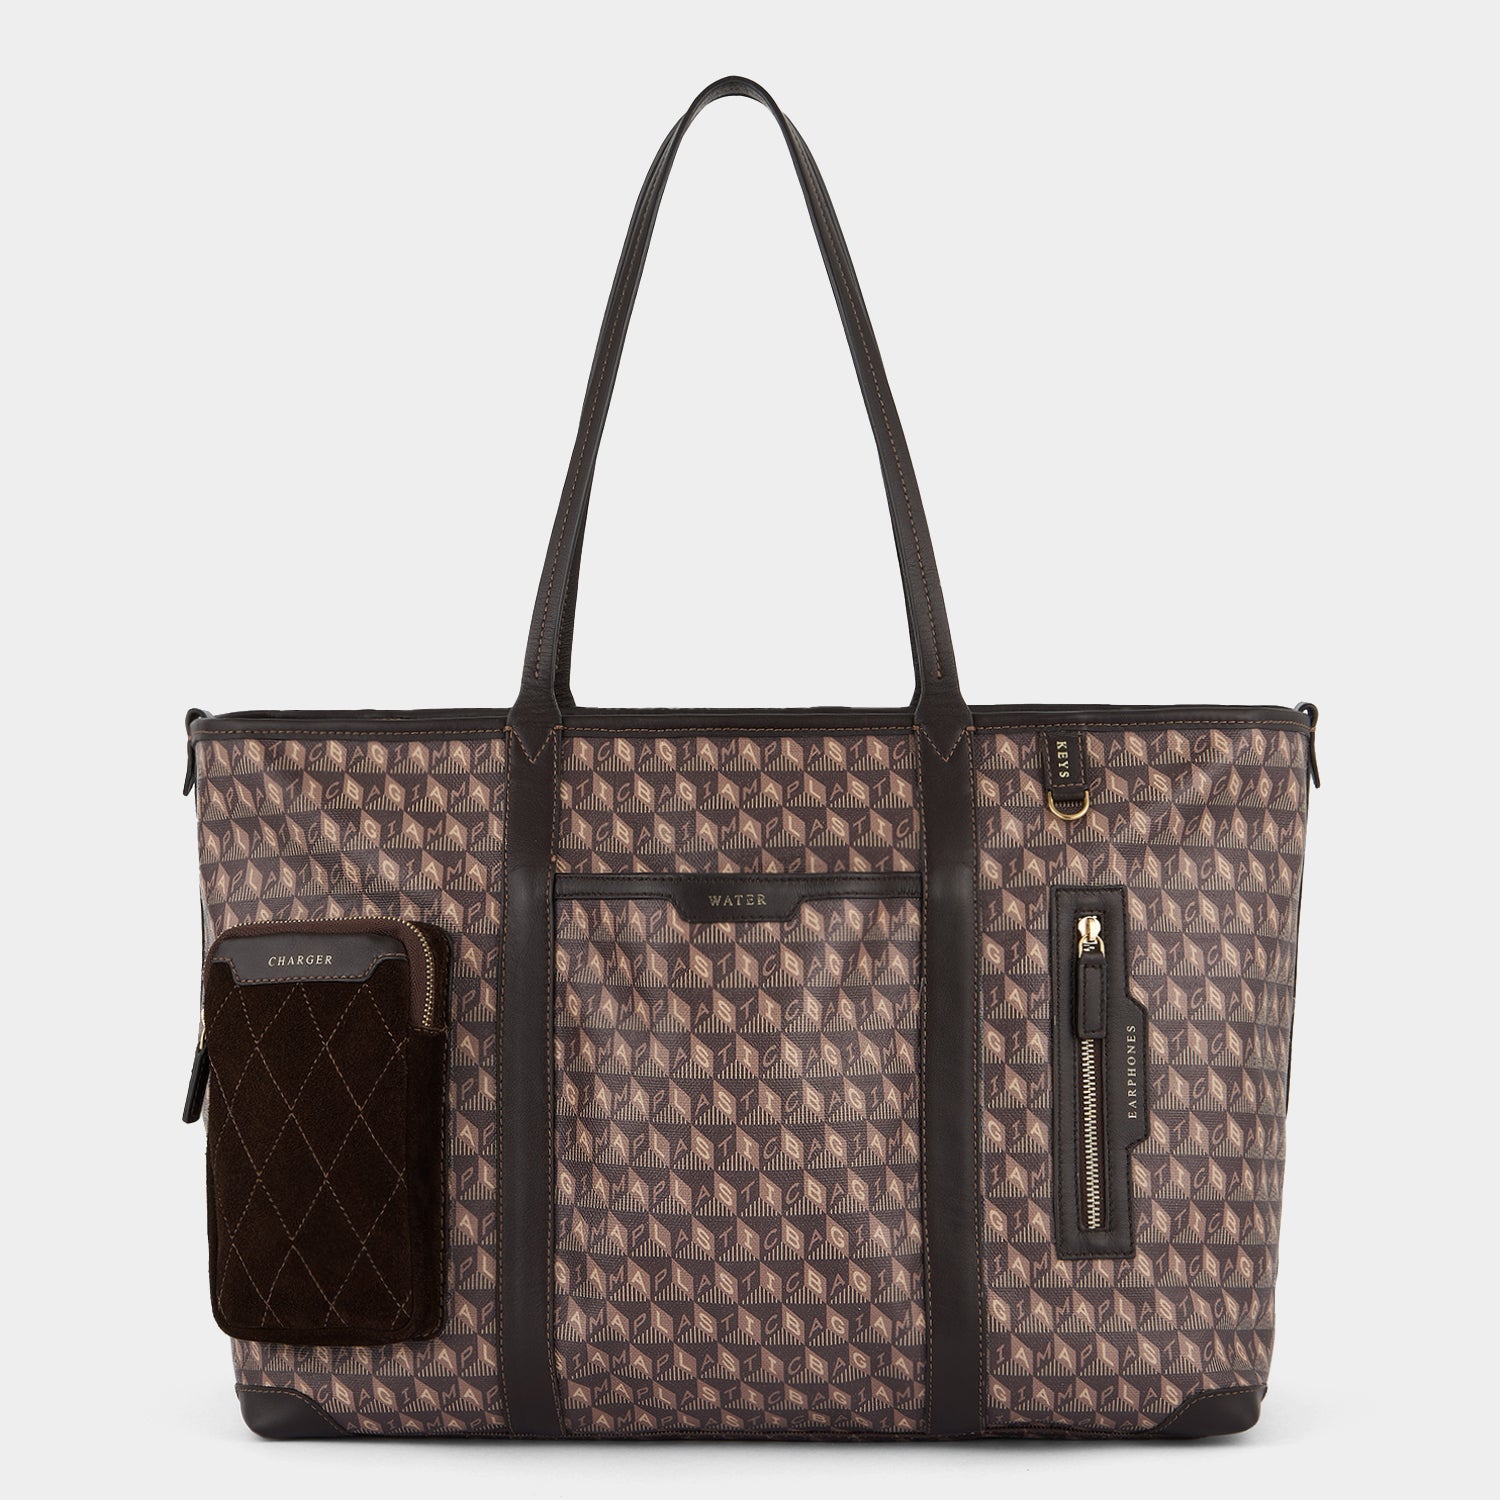 Shop Tote & Crossbody Bags, Bags & Accessories